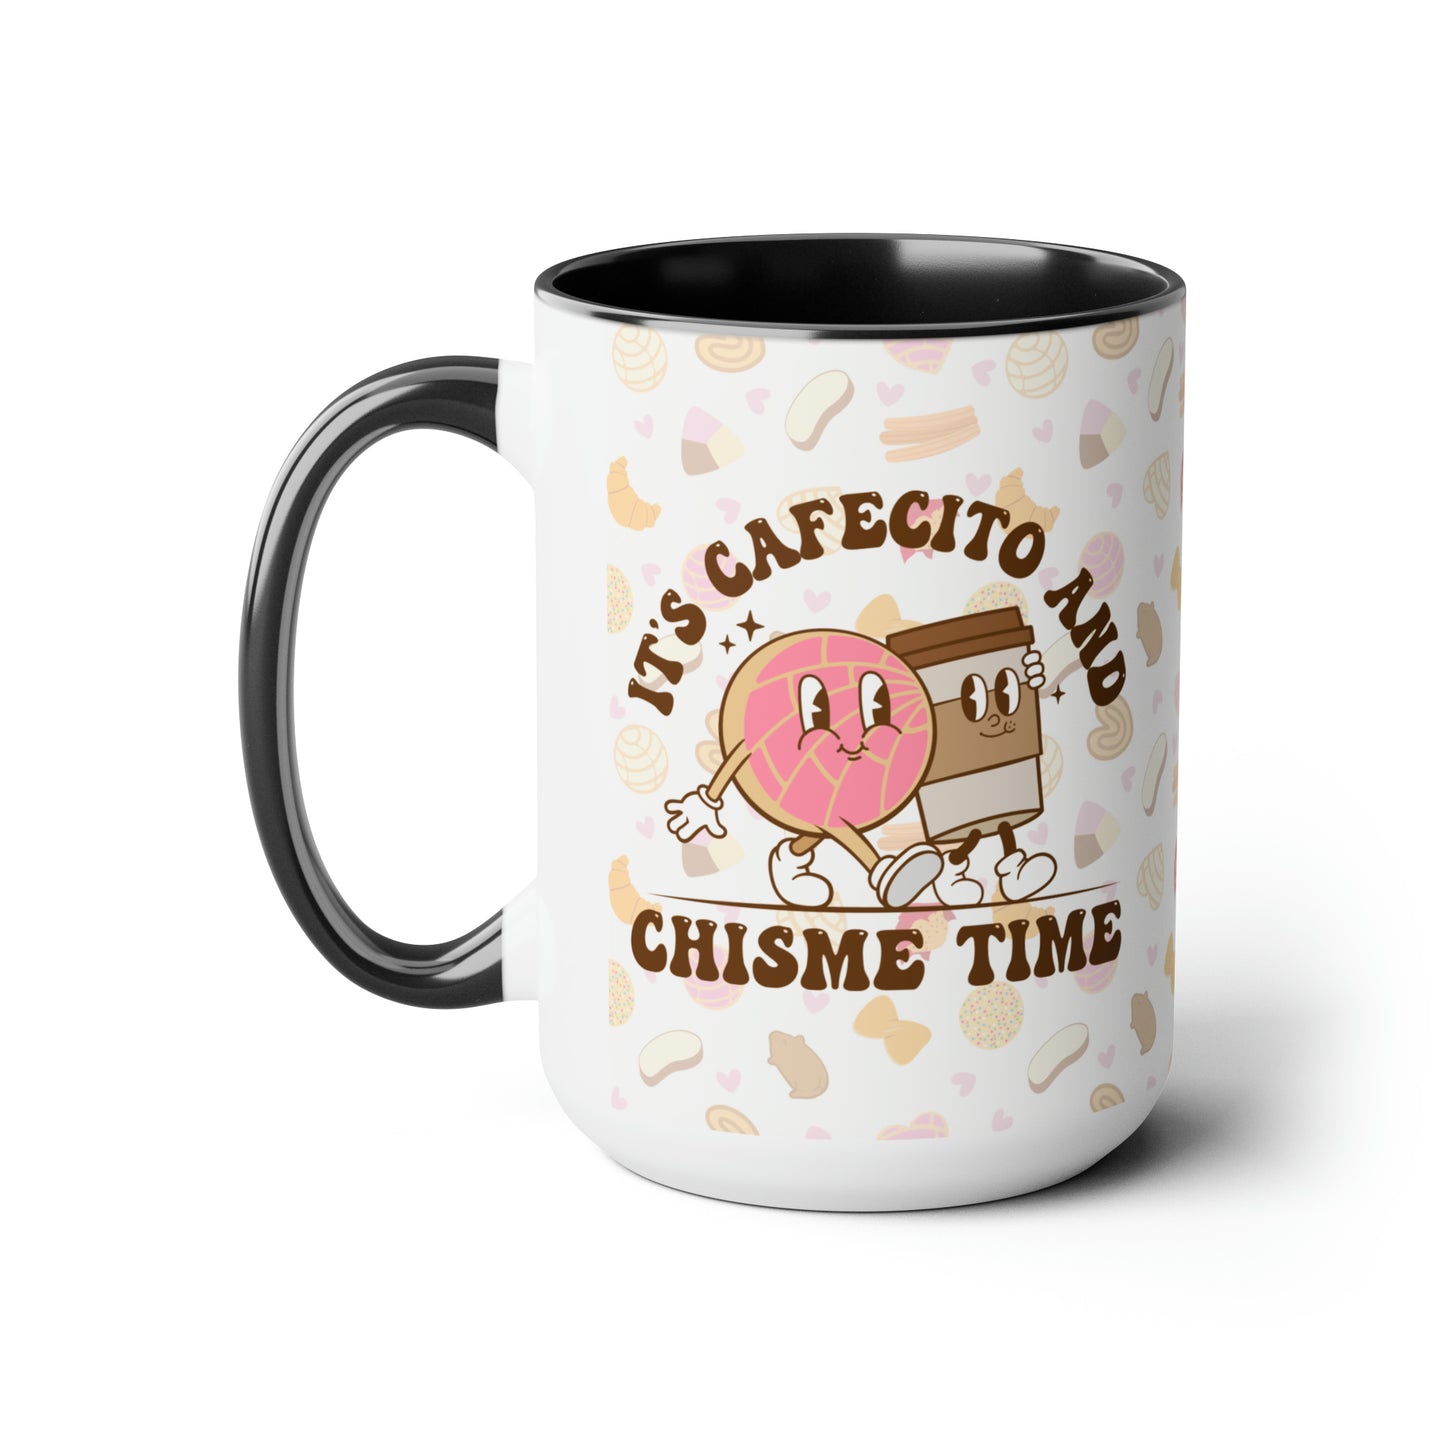 Cafecito and chisme time Coffee Mugs, 15oz for godmother, Mexican mom or Latin friend. Christmas gift for Mexican friends!!